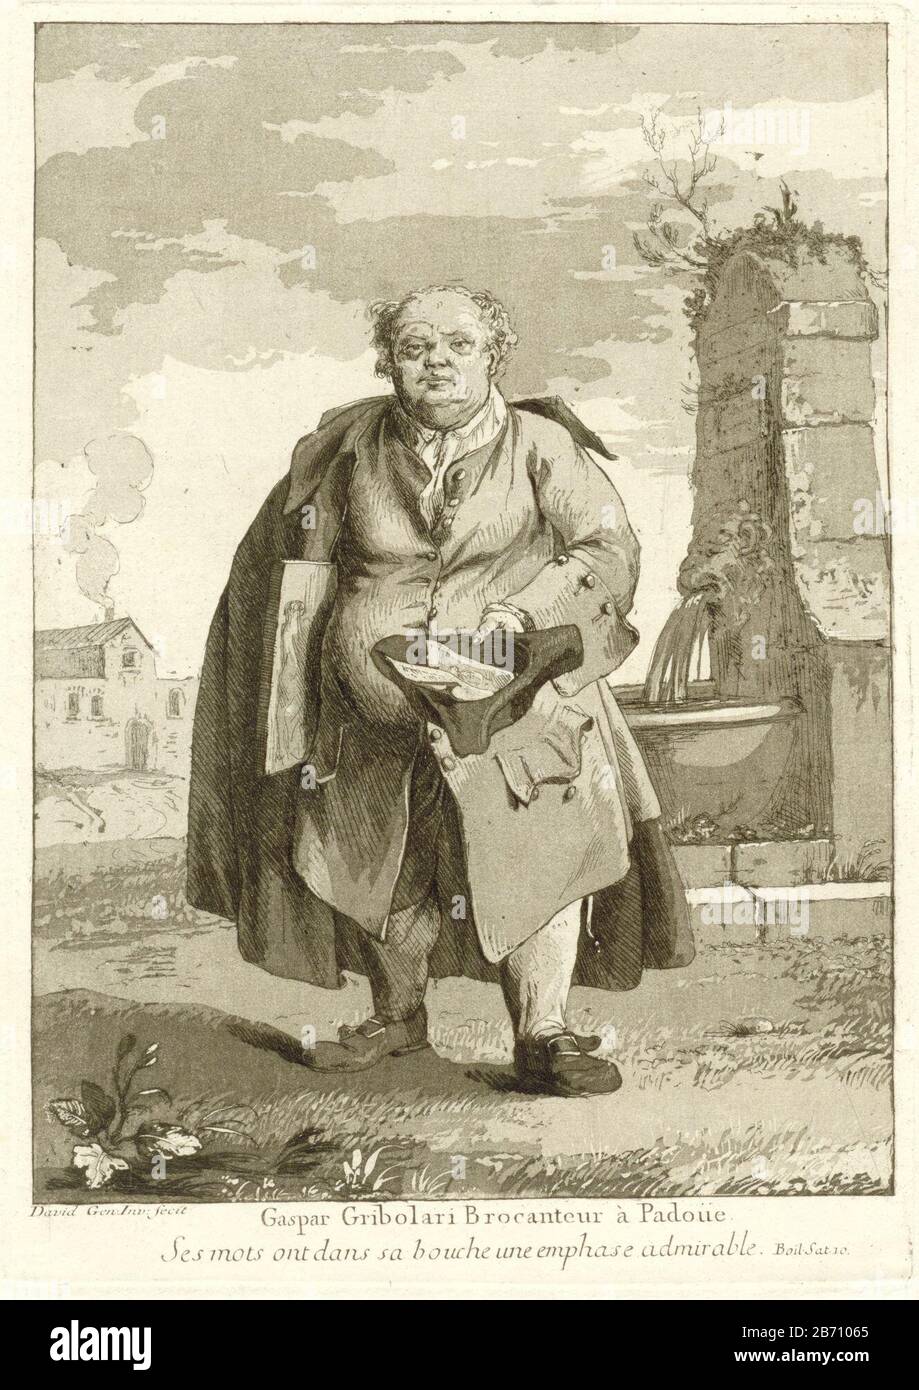 The art dealer Gaspar Gribolari from Padua. Under his right arm a painting, drawing or print. In his left hand an inverted hat with prints. Behind it a fountain. Title ondermarge. Manufacturer : printmaker Giovanni David (listed building) in its design: Giovanni David (listed property) writer Nicolas Boileau (listed building) commissioned by Giovanni David Dedicated to: Domenico CorviPlaats manufacture: printmaker: Venice to own design: Venice Writer: Paris Dedicated by: Venice Dedicated to: Italy Date: 1775 Physical characteristics: etching and aqua tint in sepia brown material: paper Techniq Stock Photo